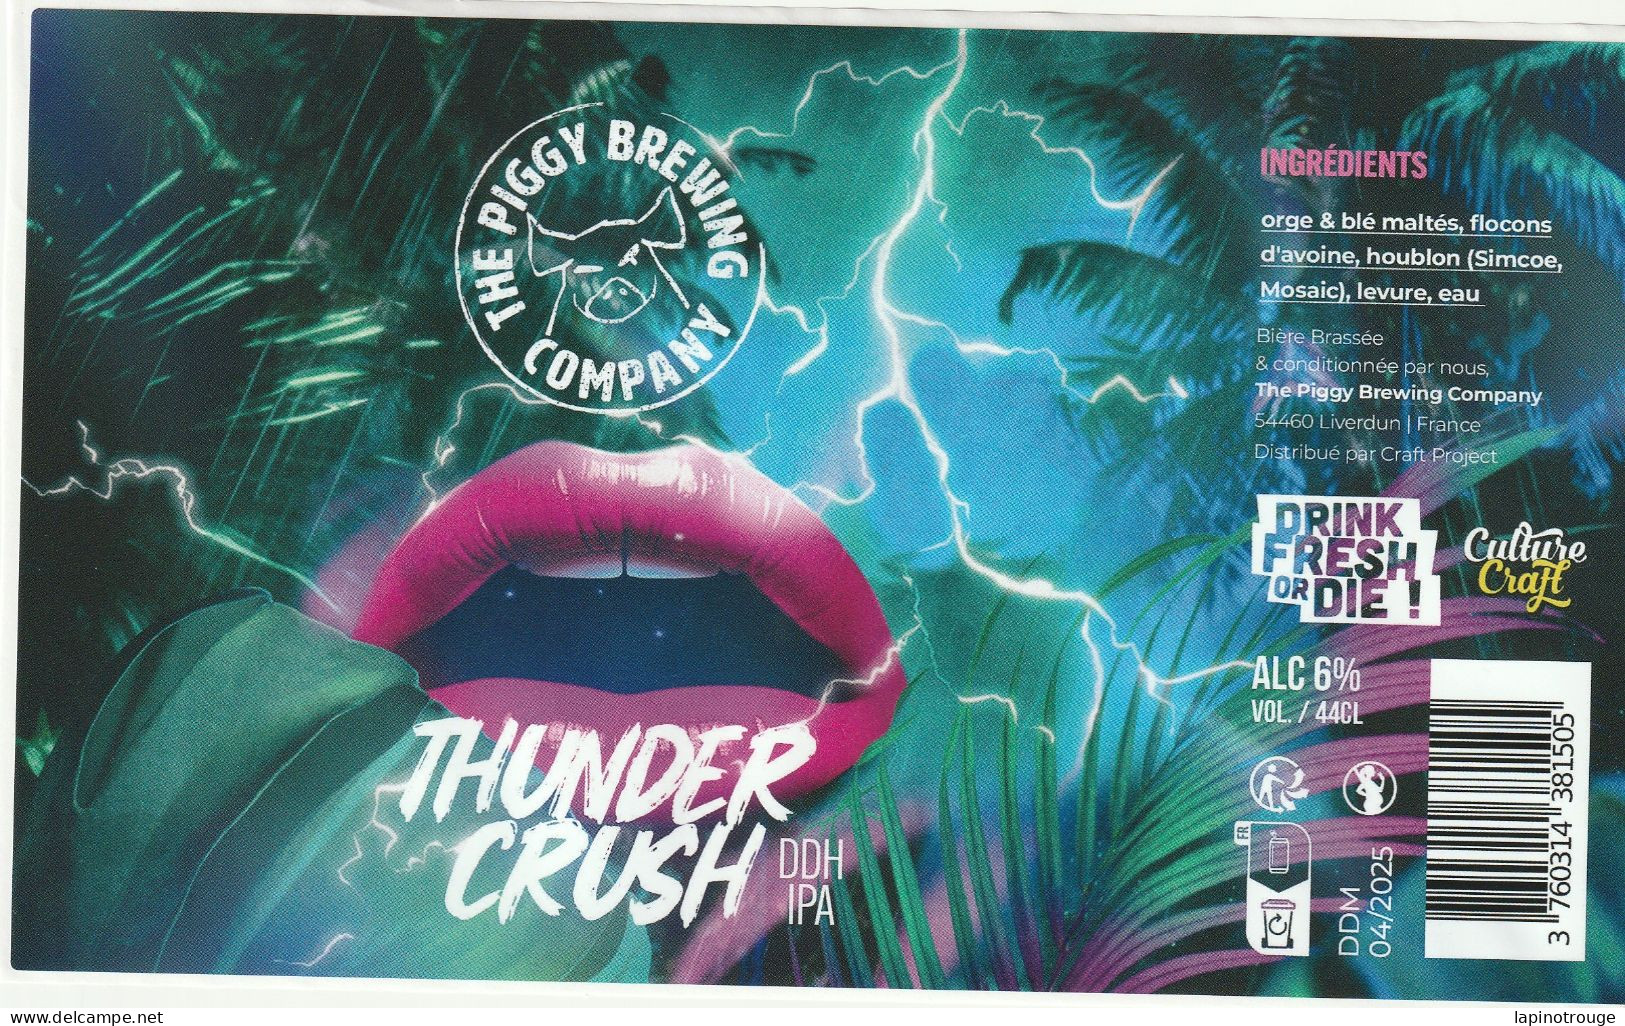 Etiquette Bière The Peggy Brew Compagny Thunder Crush DDH IPA - Tischkunst